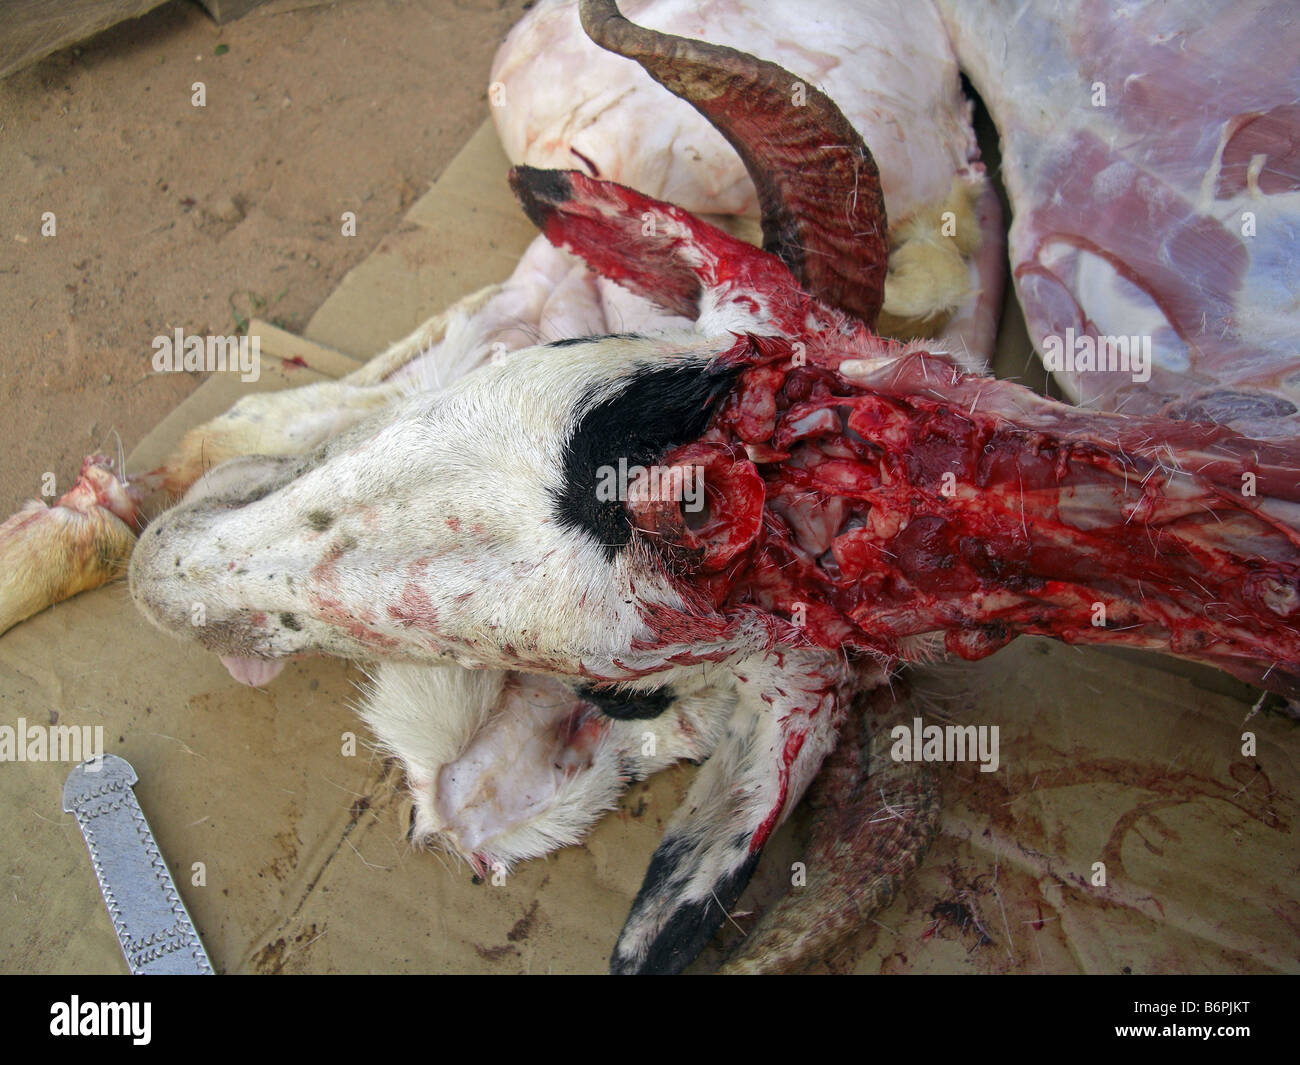 Tabaski or Eid Al Adha. The slaughter of a goat in a ritual sacrifice.The Gambia, West Africa. Stock Photo